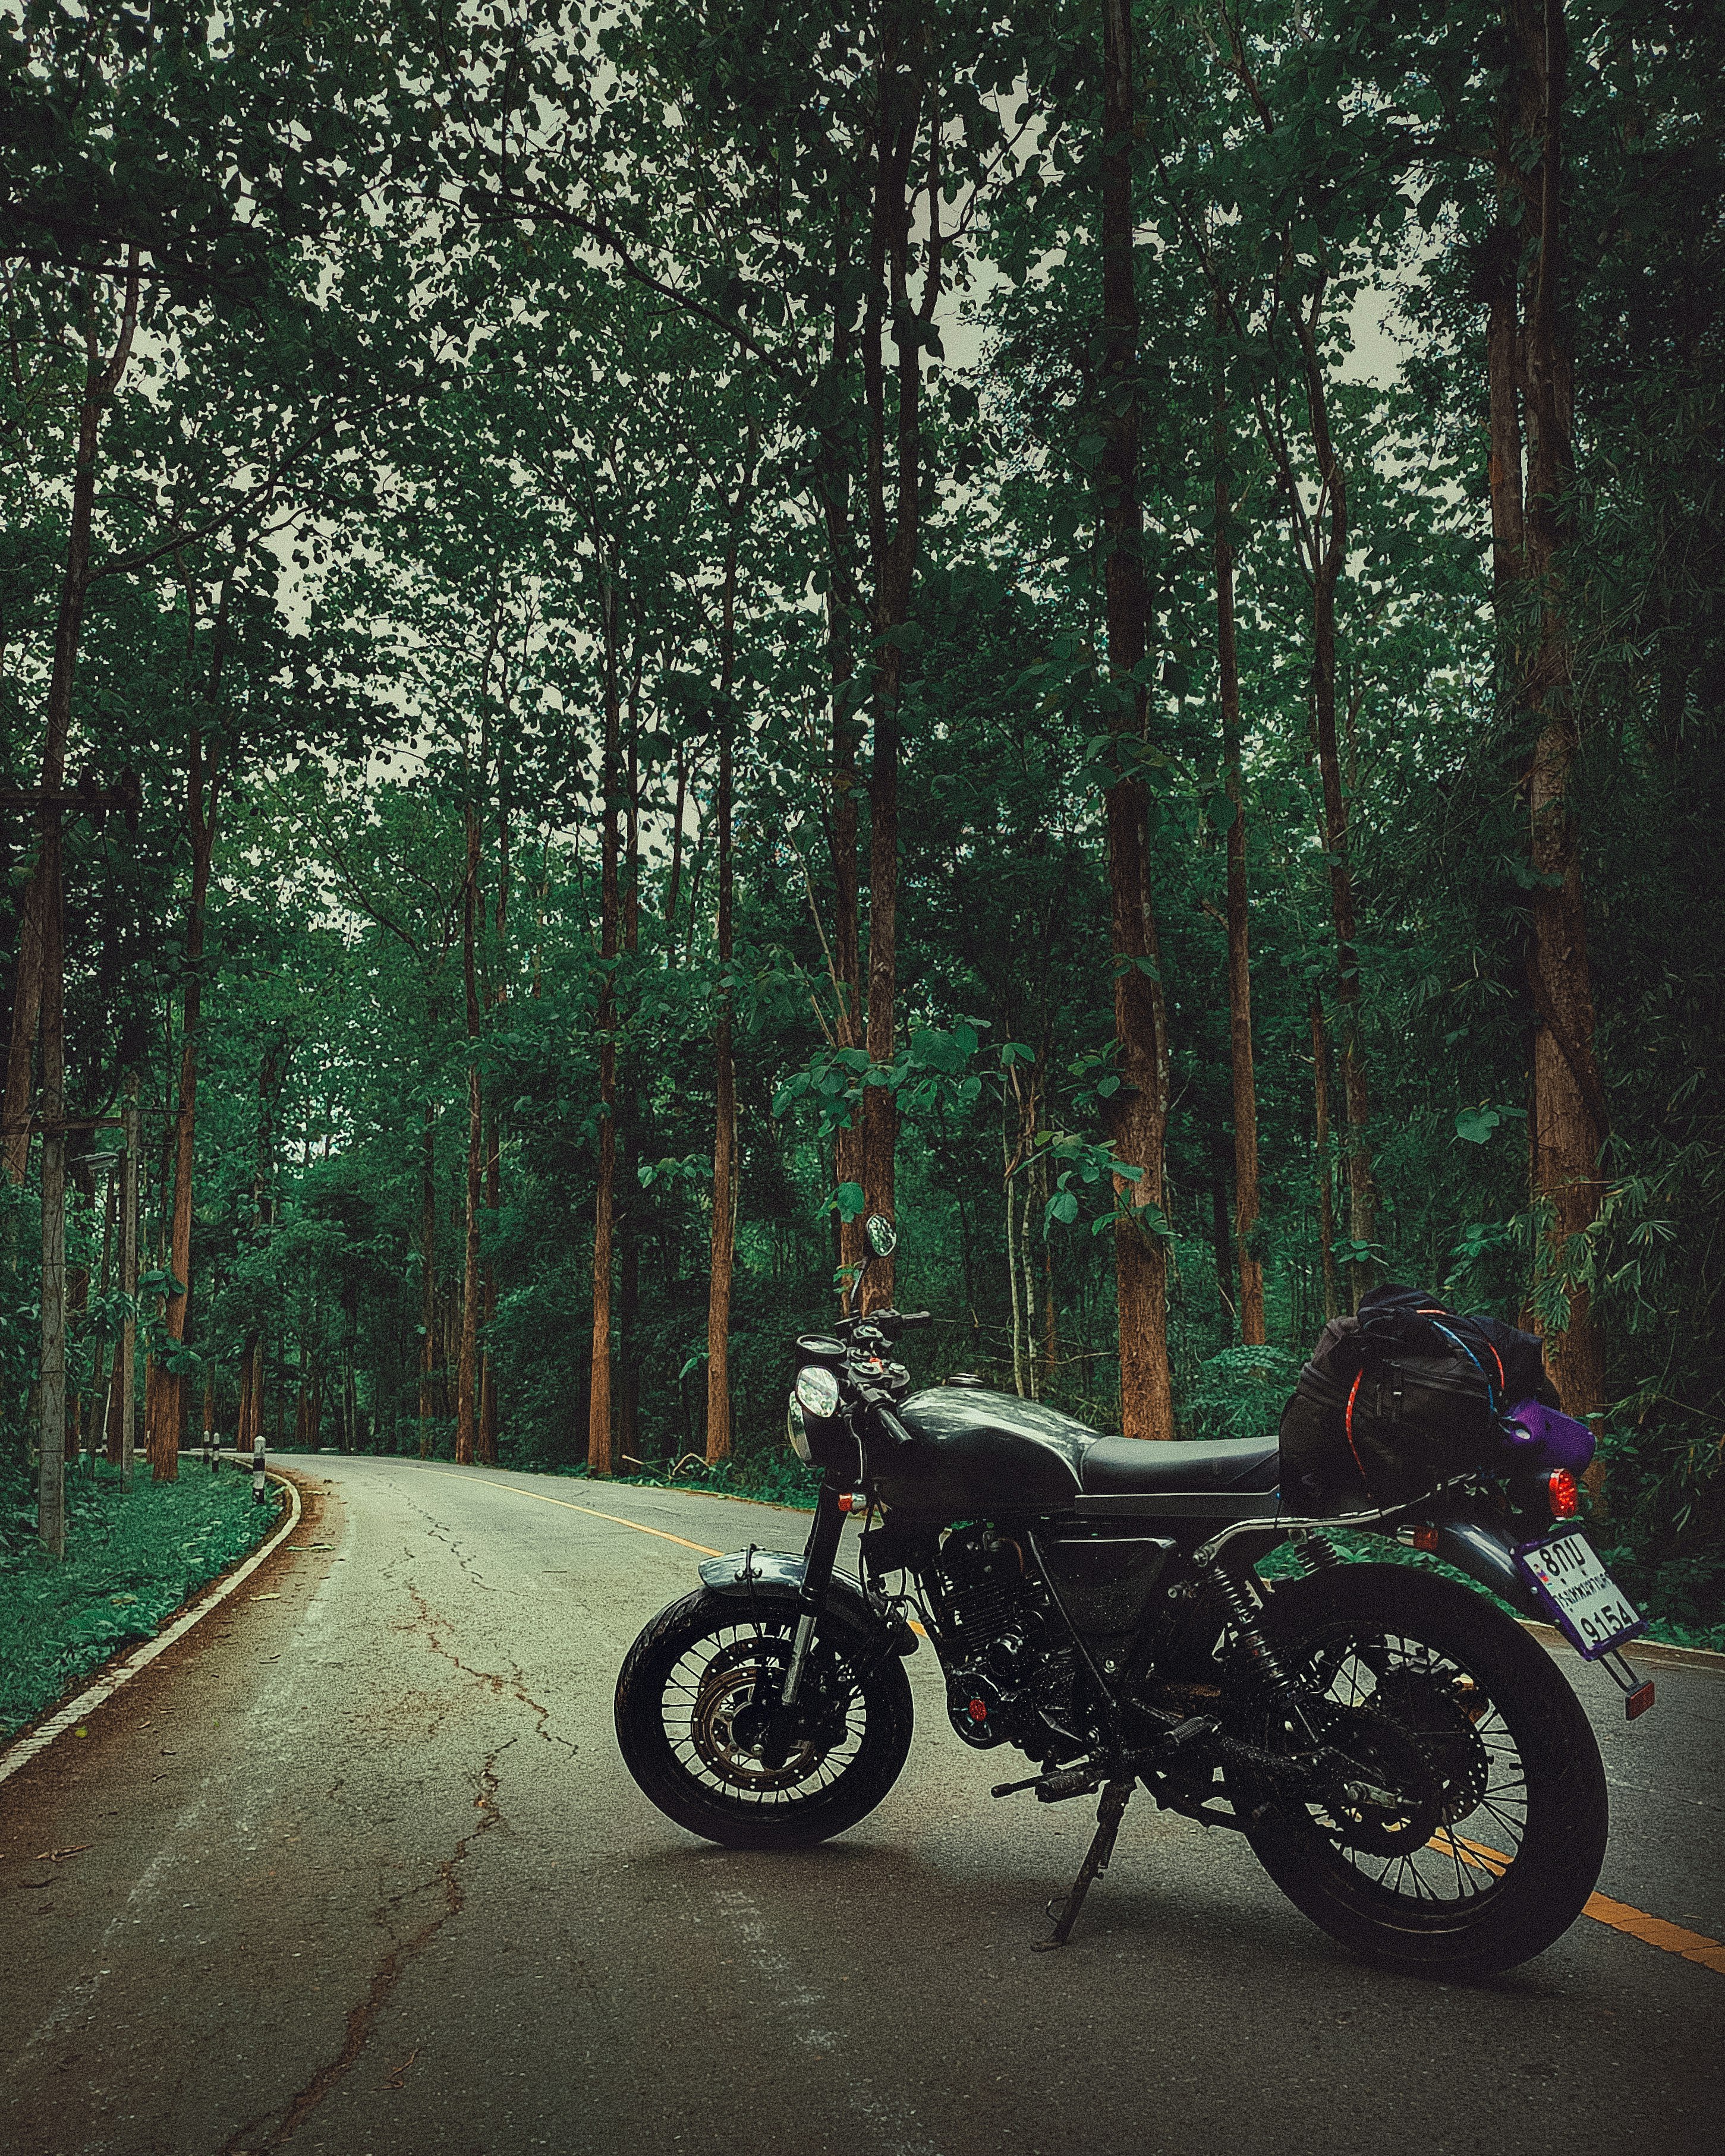 black motorcycle on road surrounded by trees during daytime